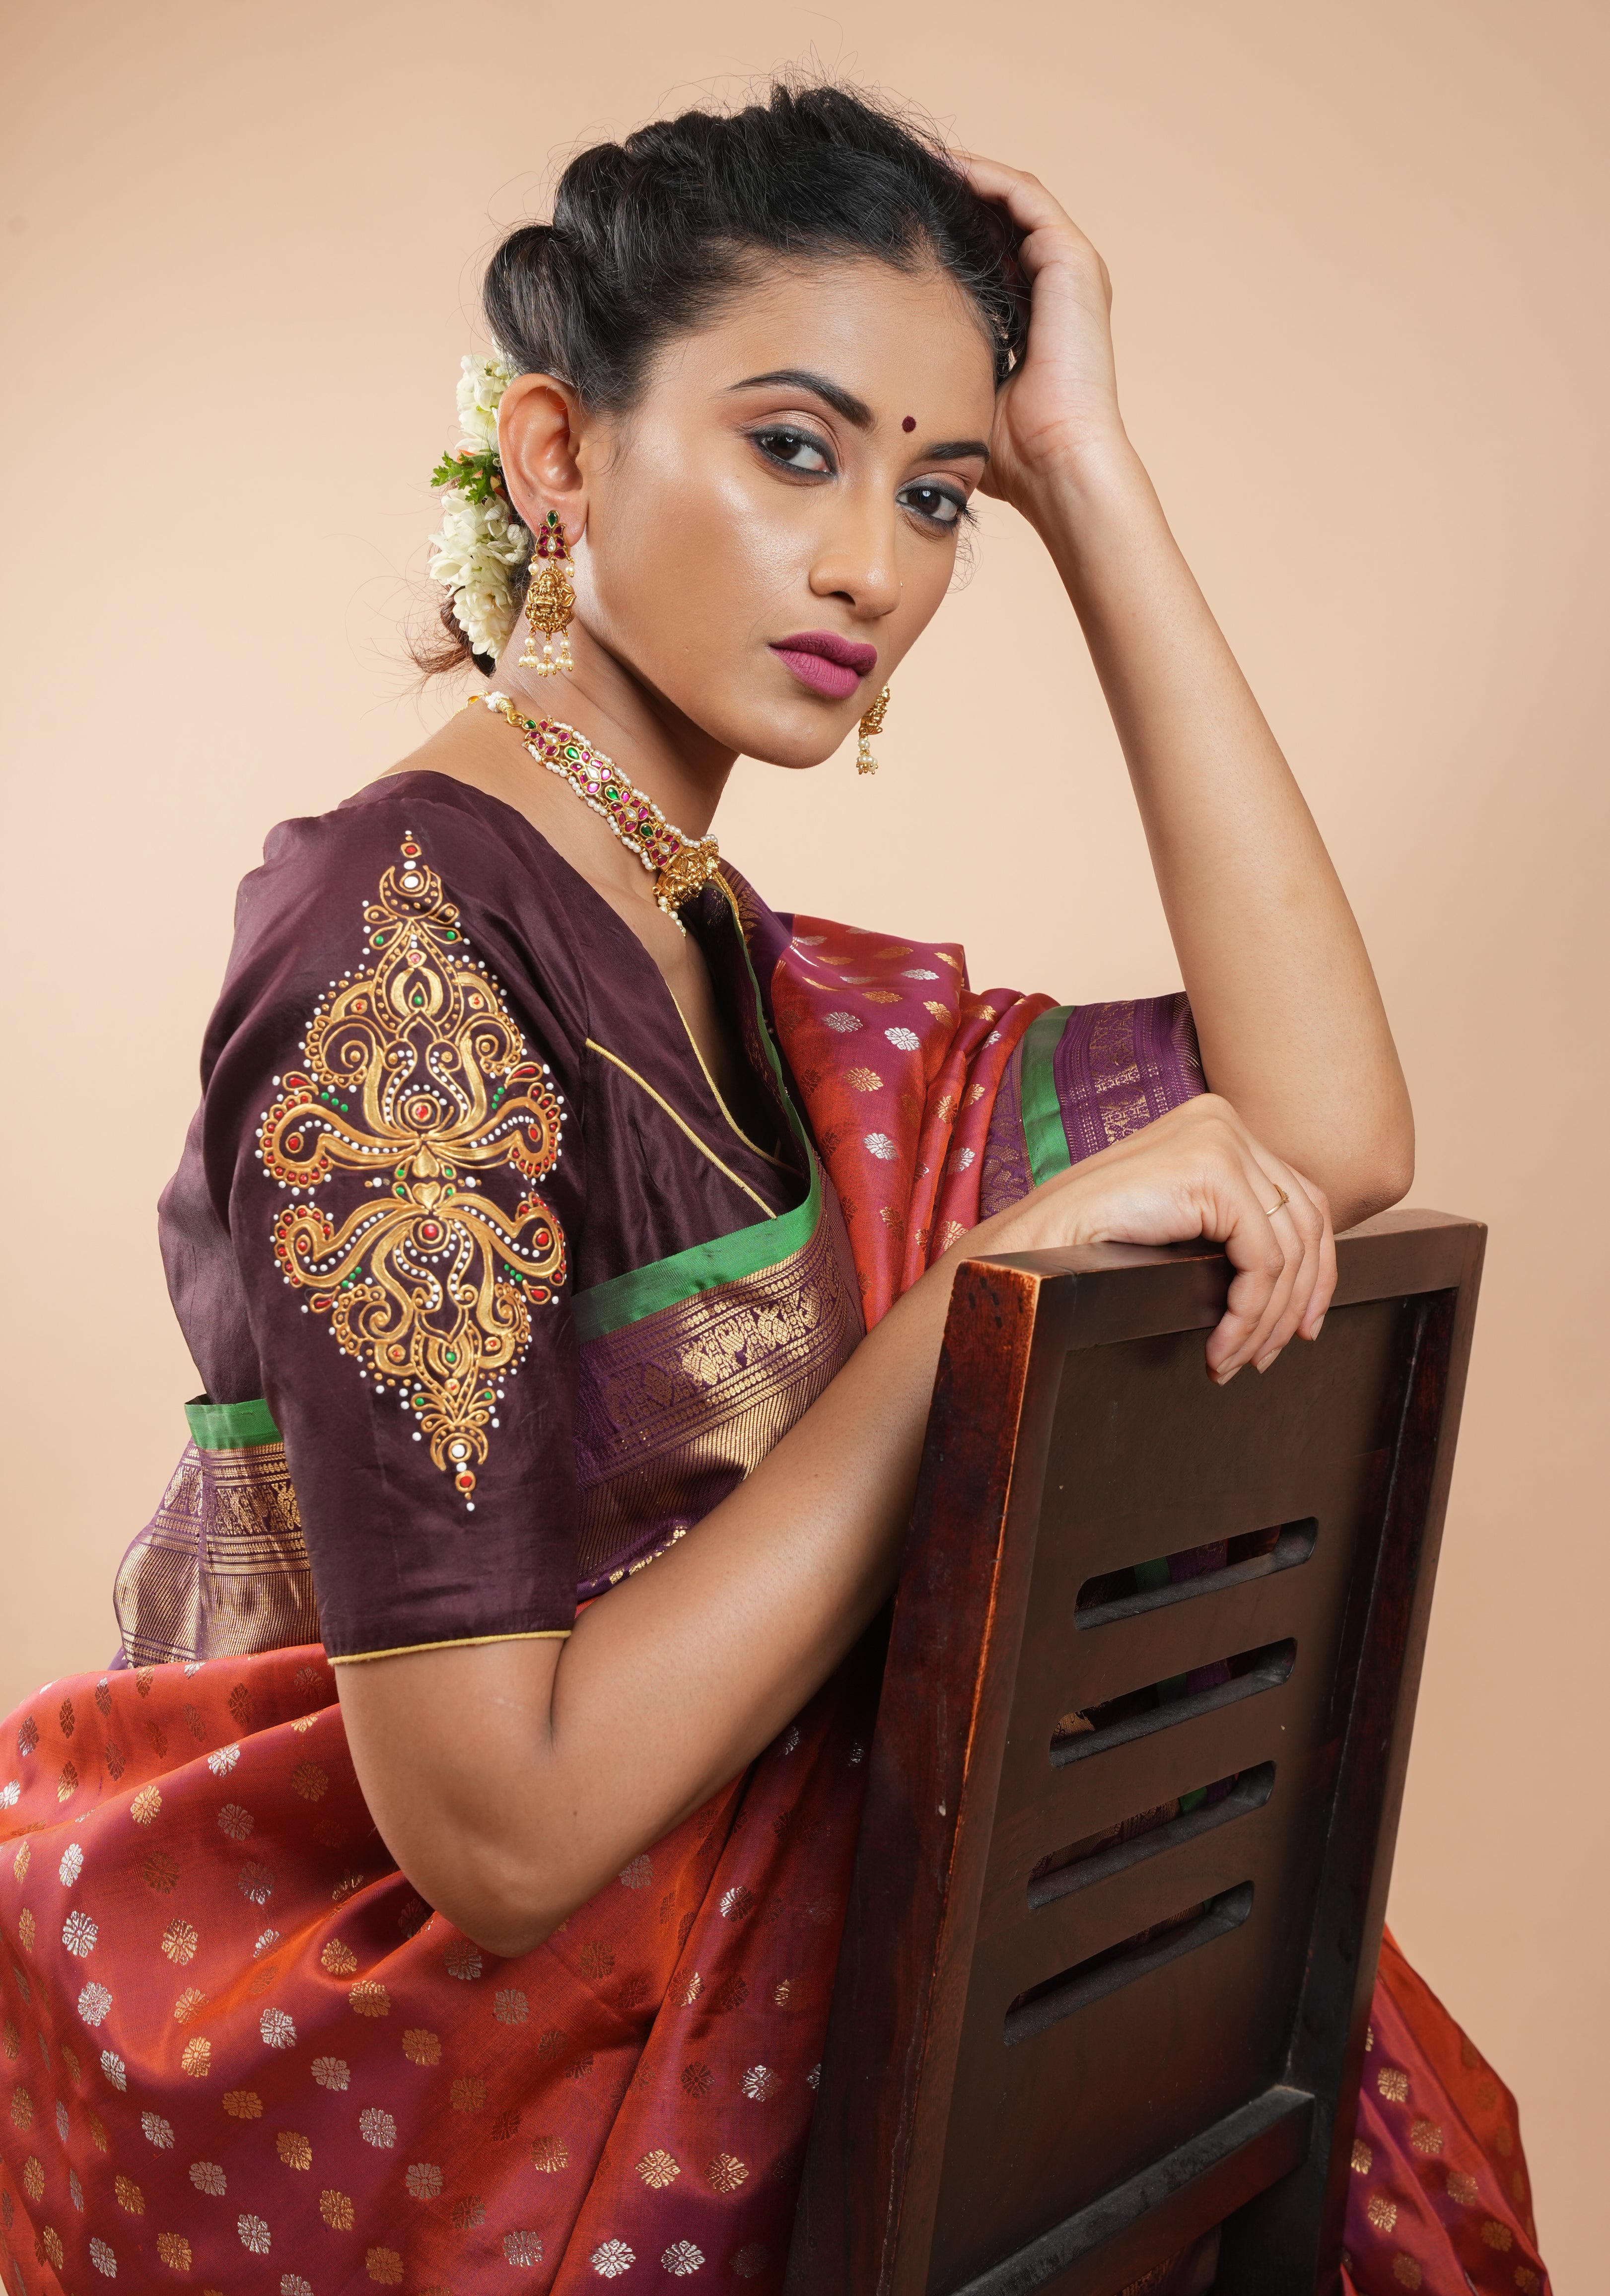 Brown Pure Silk Blouse with 3D Tanjore Art Damansk Motif on Sleeves and Arch Cutout back, Color Customization available, made to order